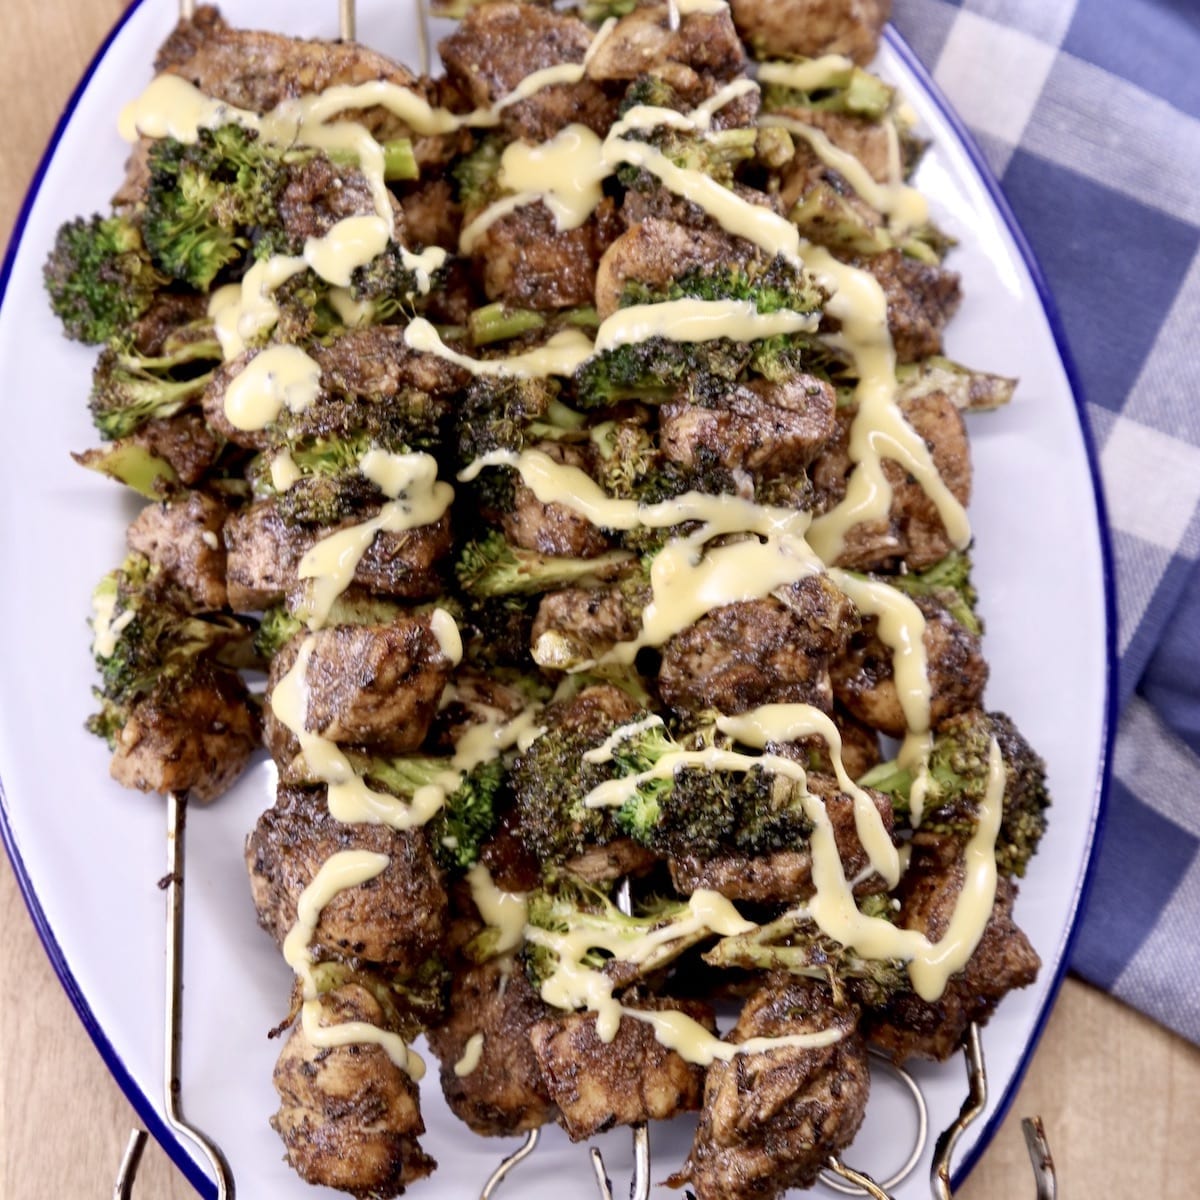 Chicken and Broccoli Skewers with cheese drizzle